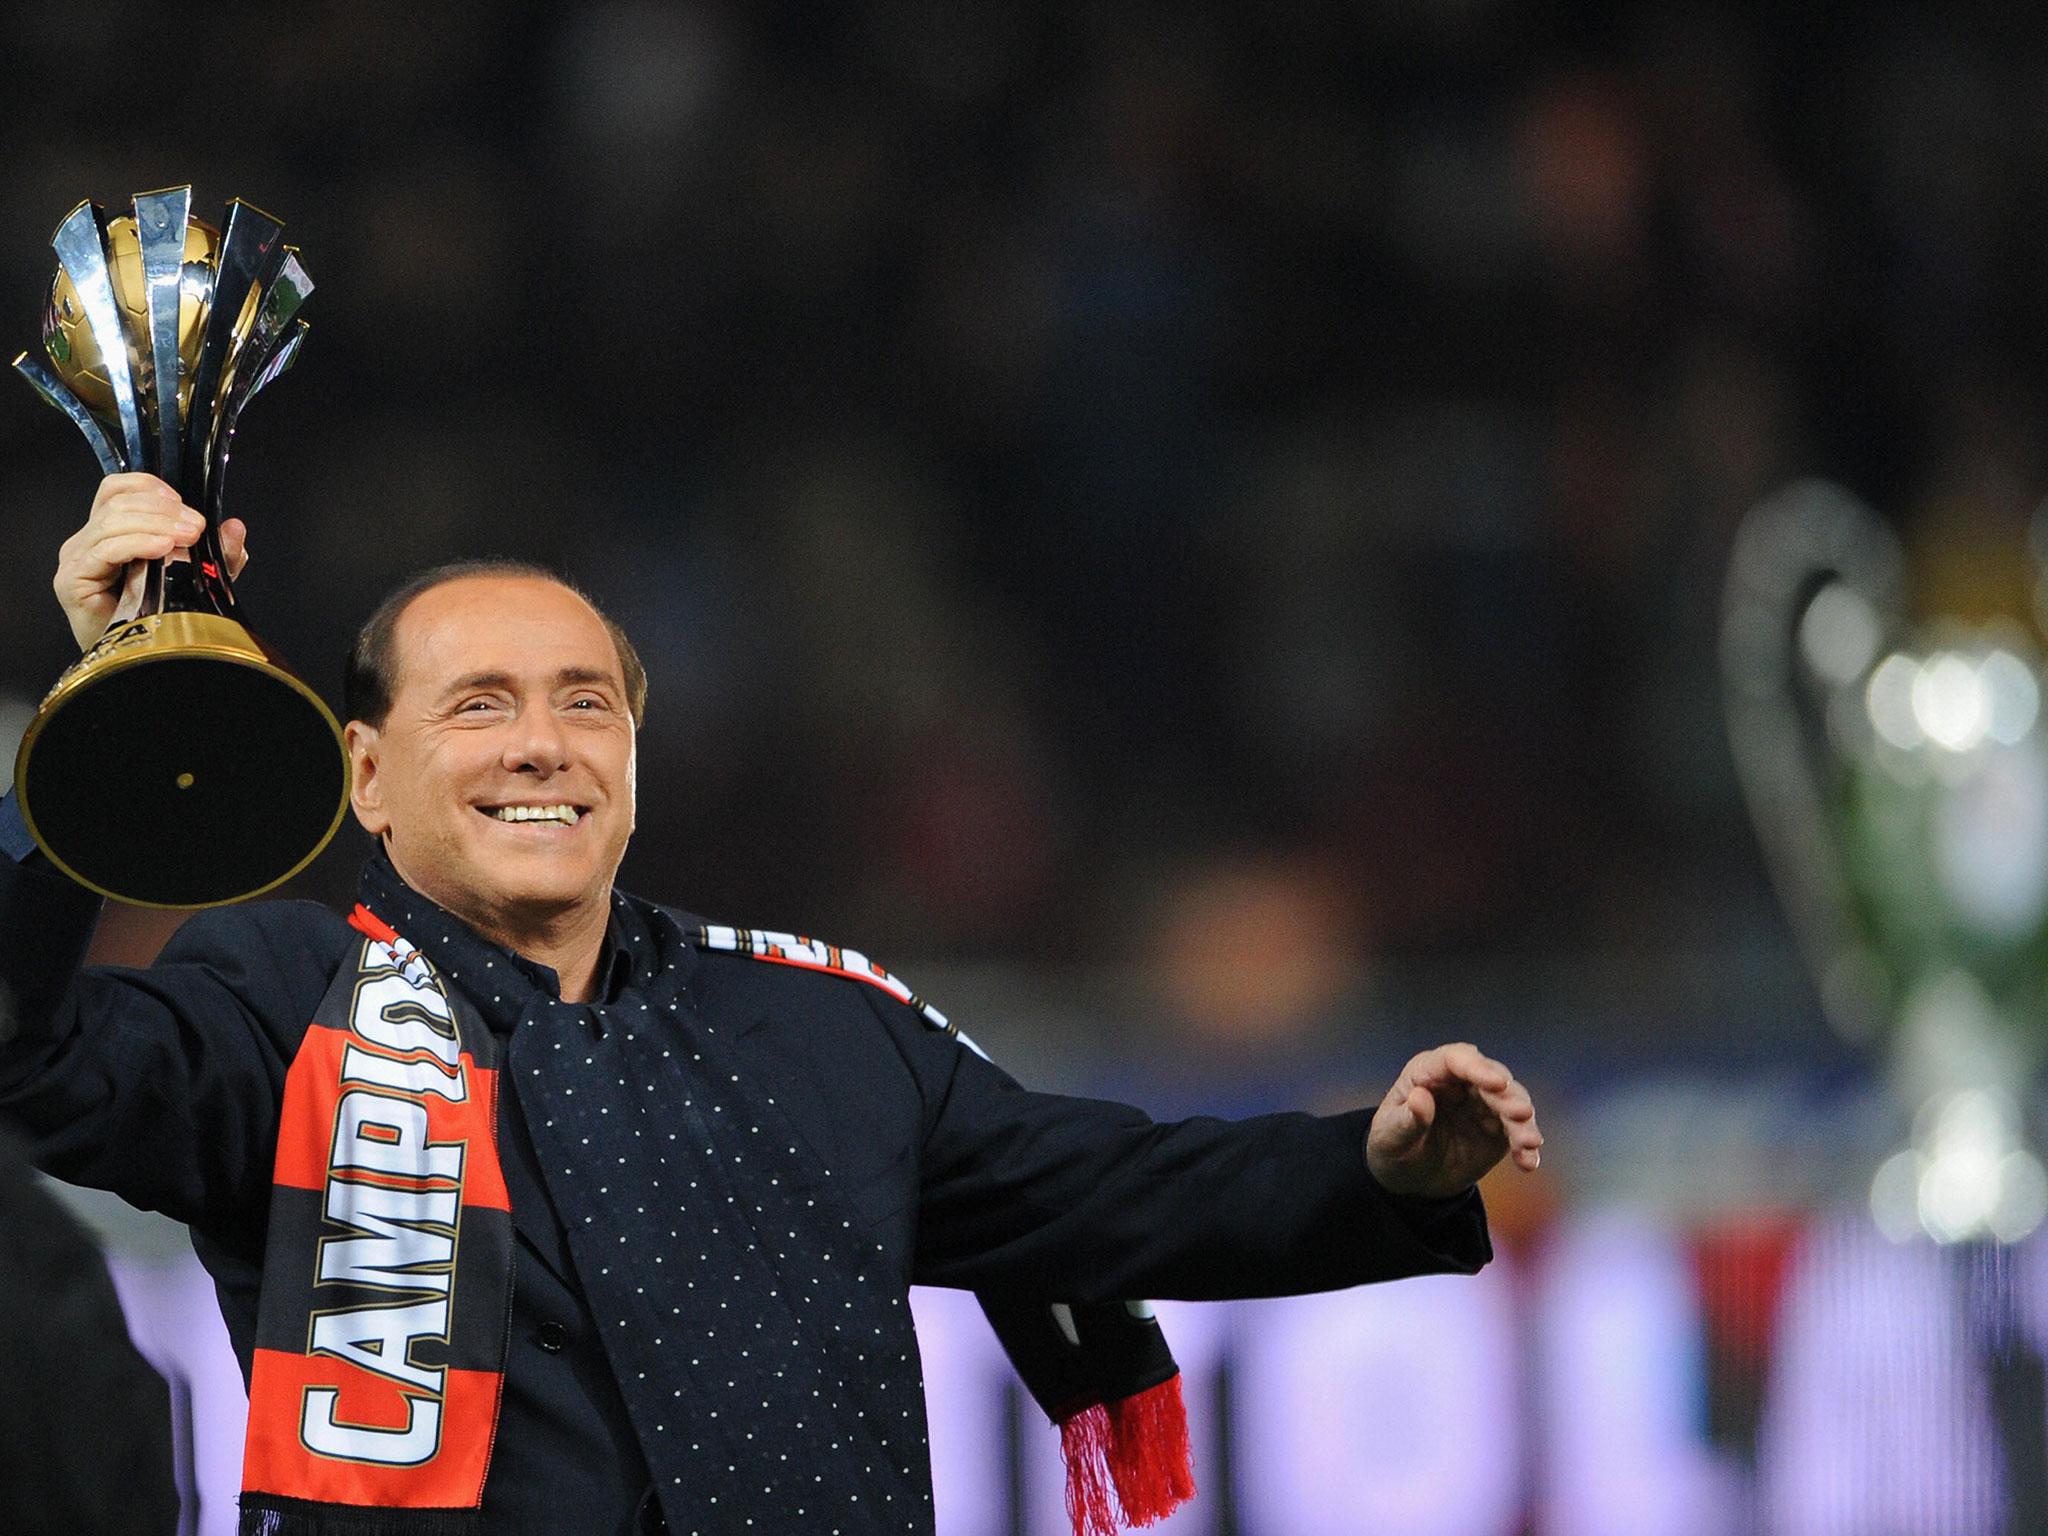 After the deal with Mr Bee fell through, Silvio Berlusconi eventually sold AC Milan to Li Yonghong